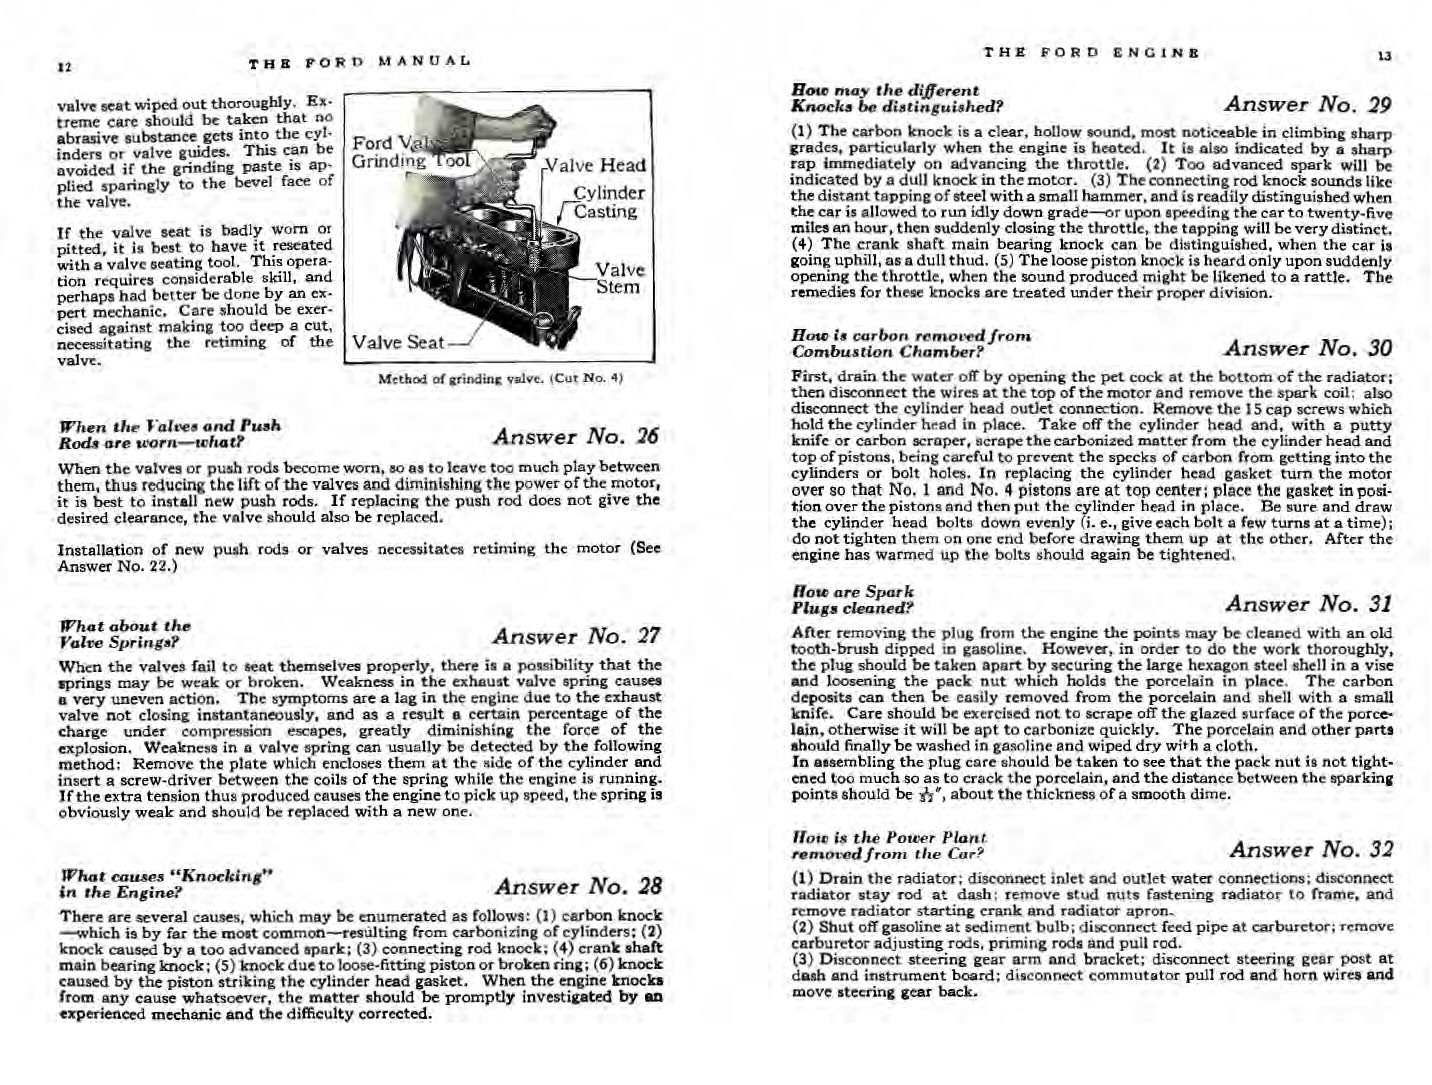 1926_Ford_Owners_Manual-12-13